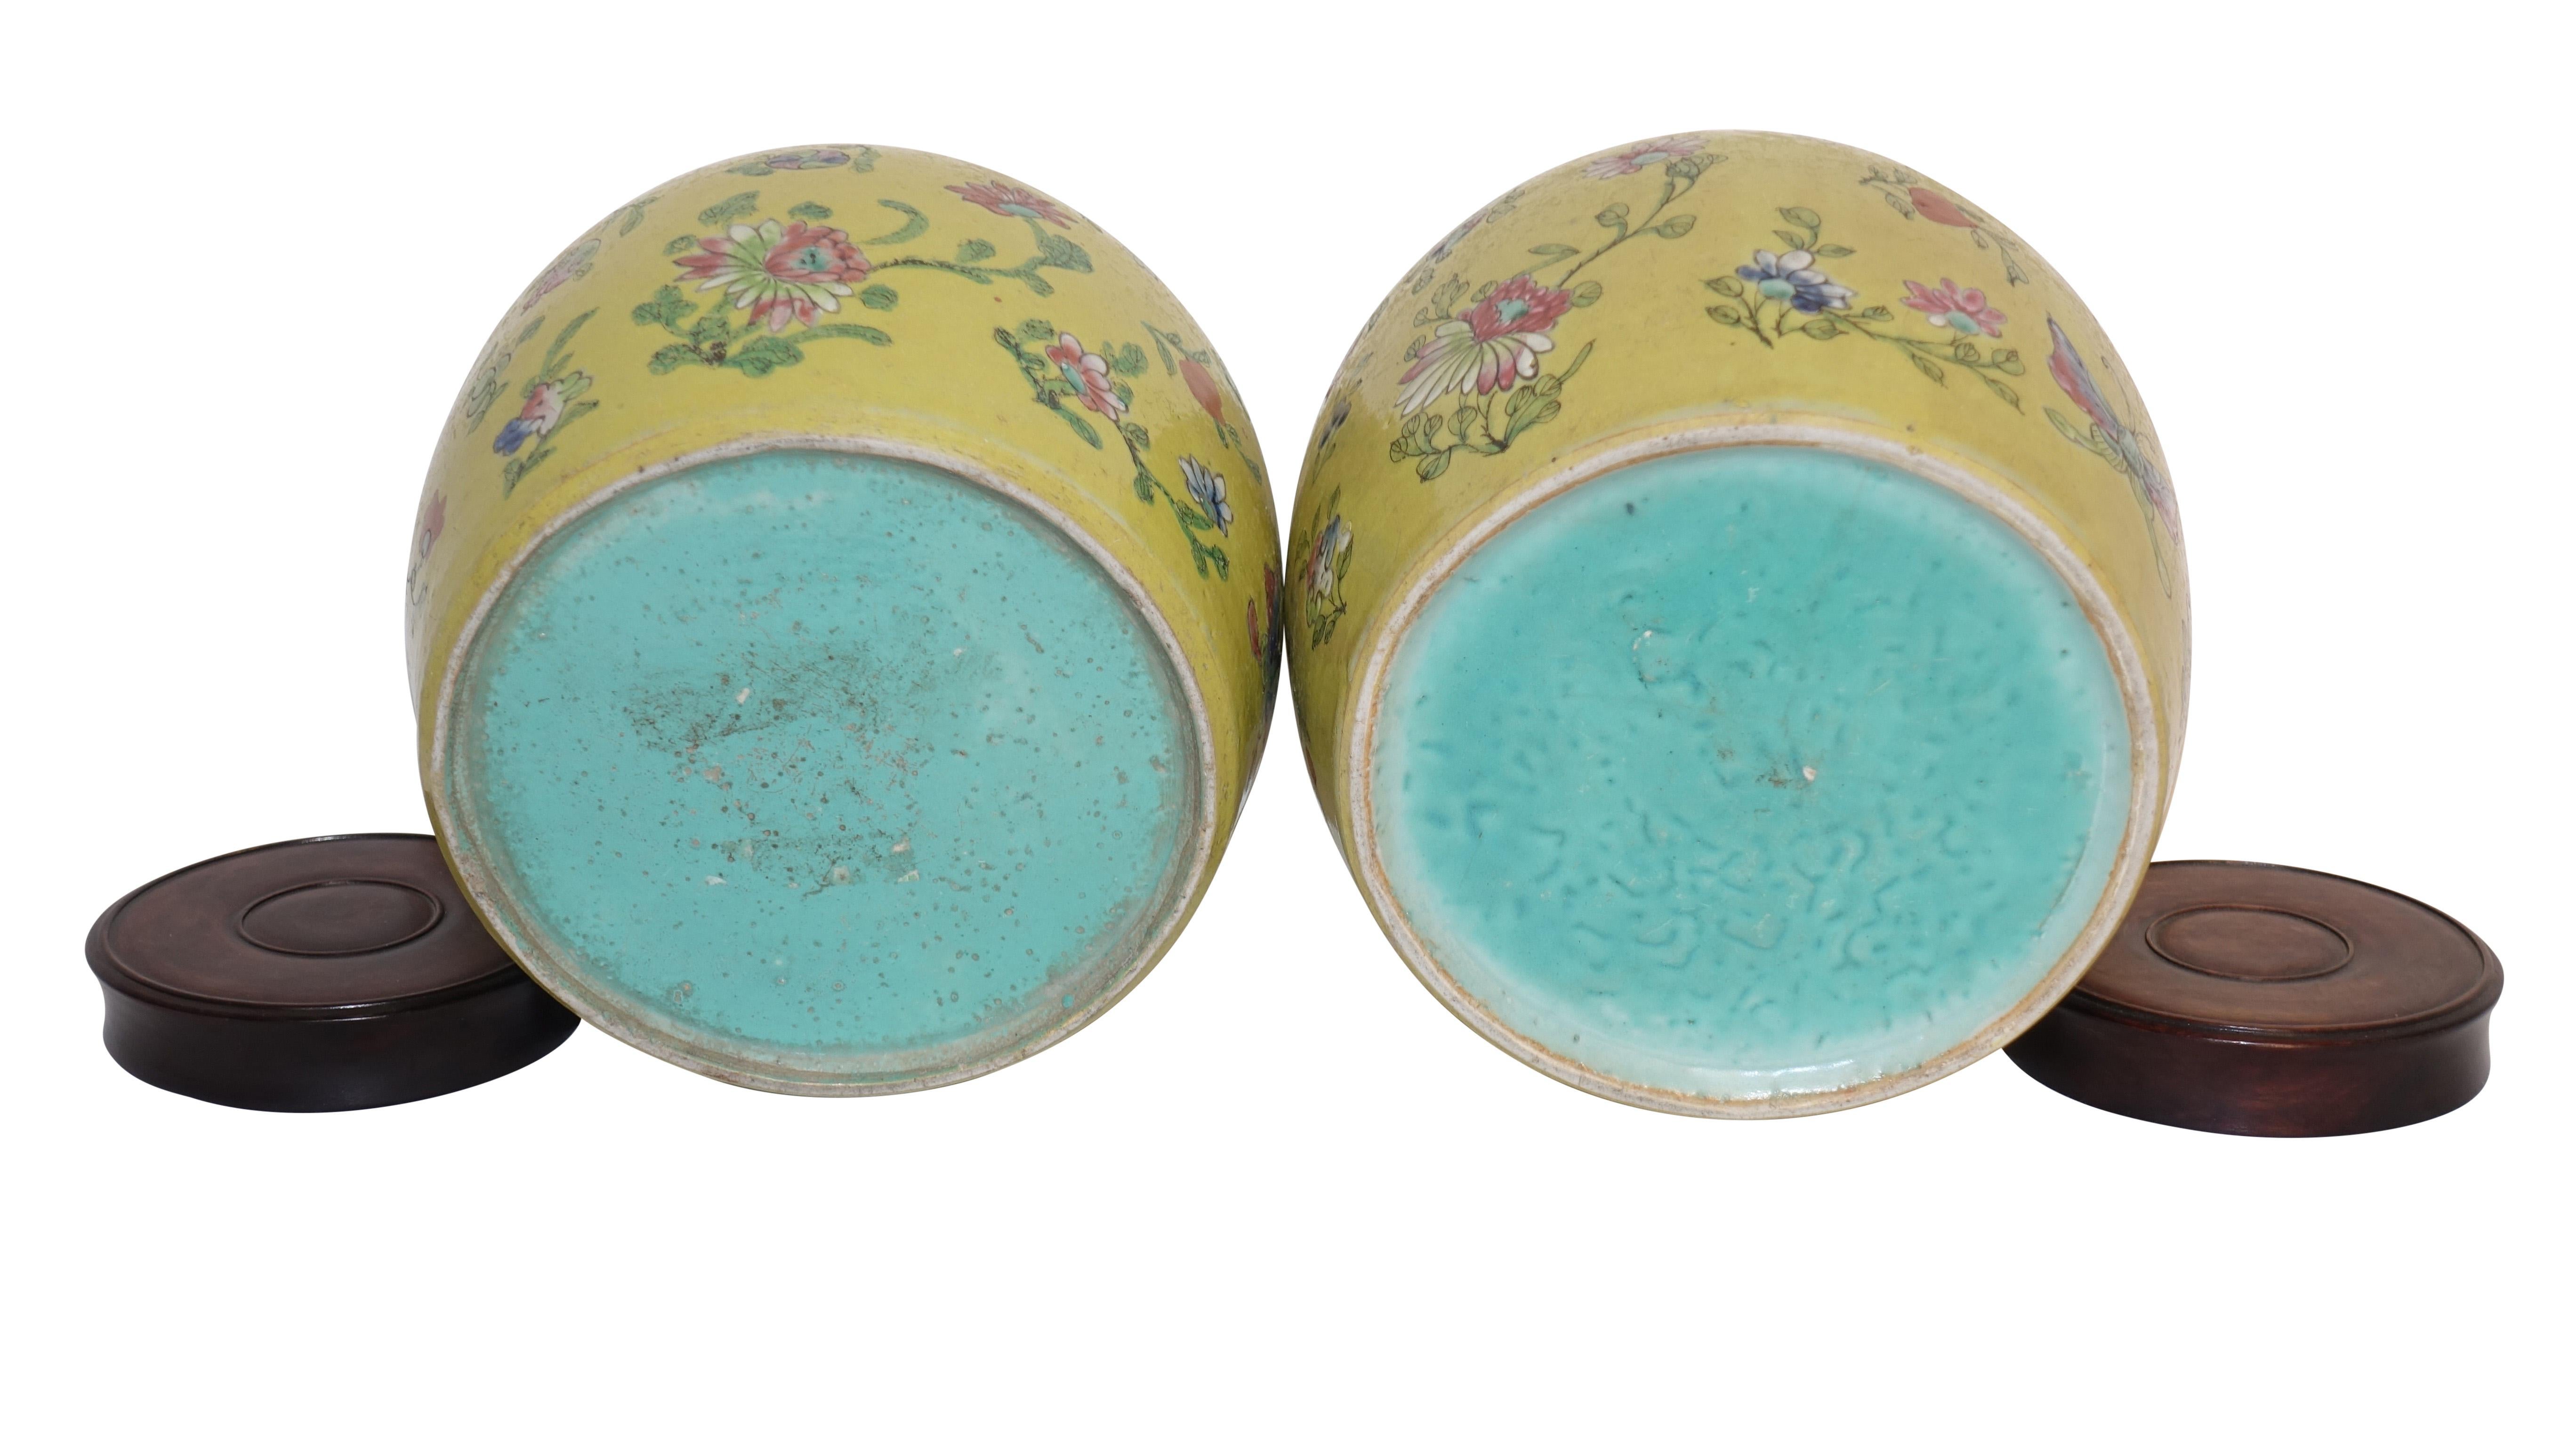 Pair of Mustard Yellow Jars with Wooden Lids, Chinese, Early 20th Century 1